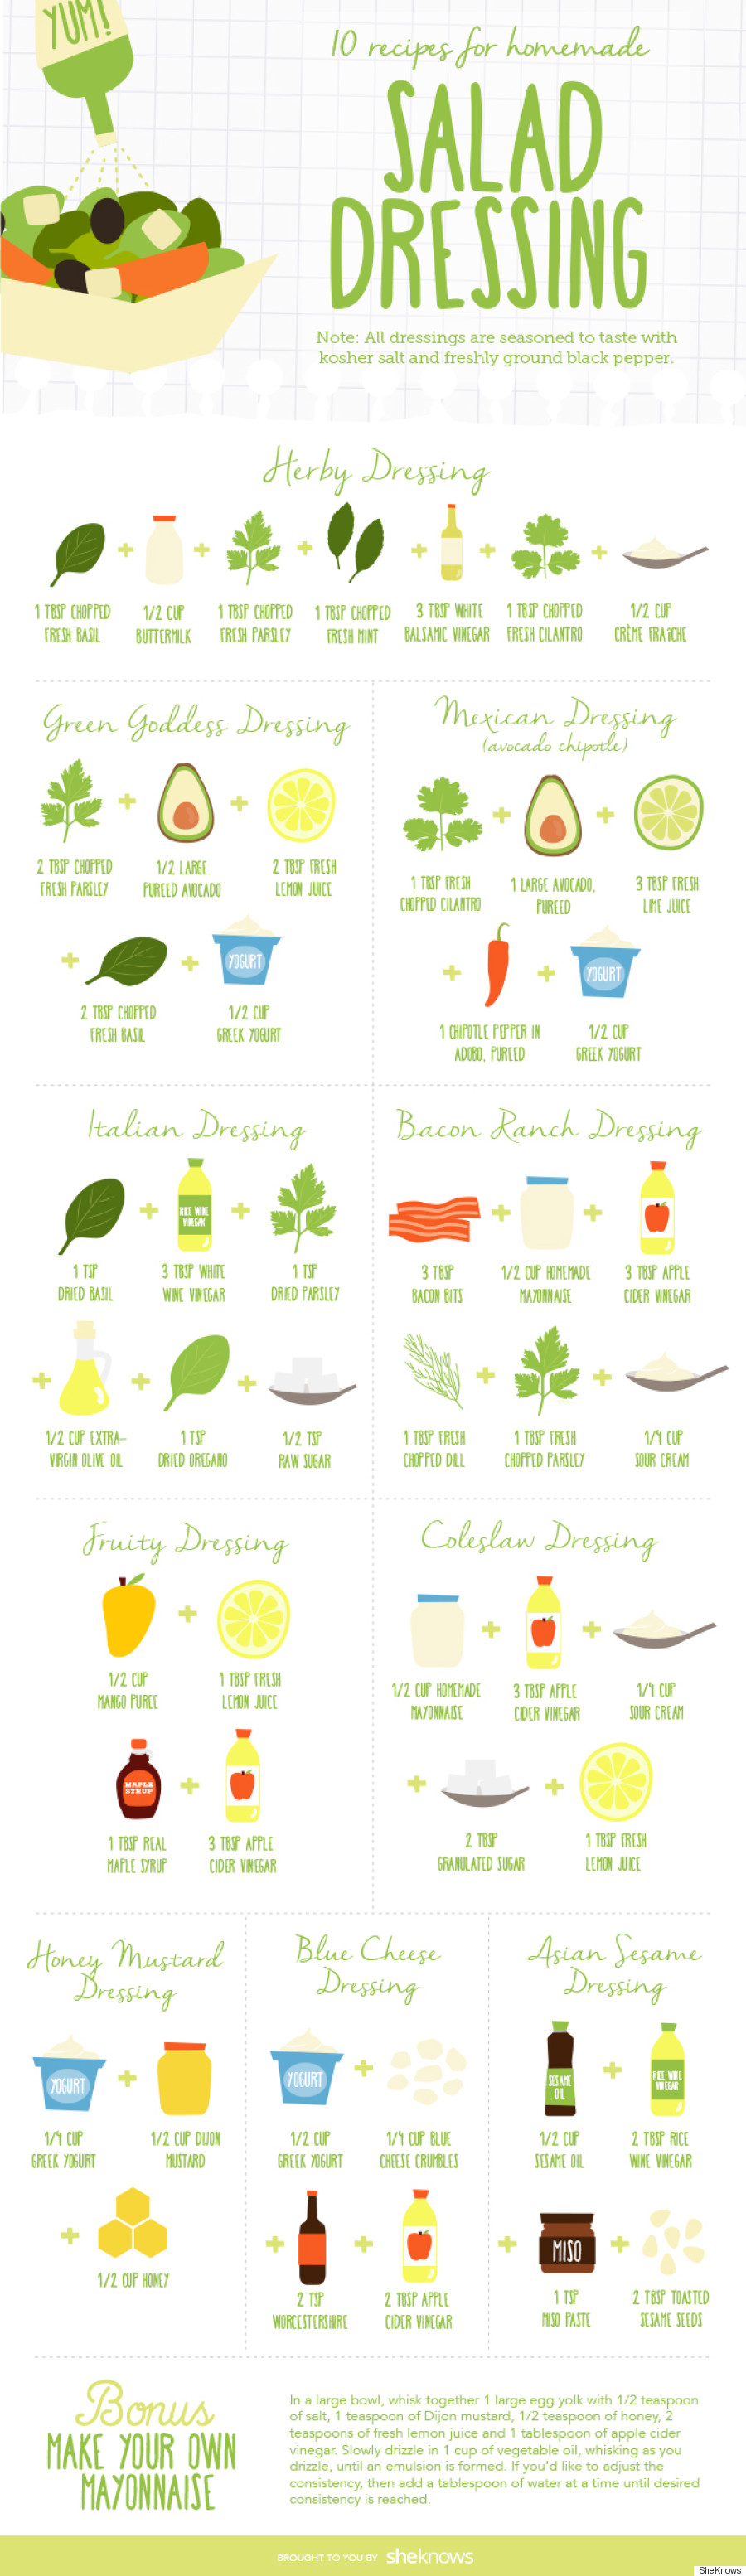 Homemade Salad Dressing Recipes To Keep On Hand | HuffPost